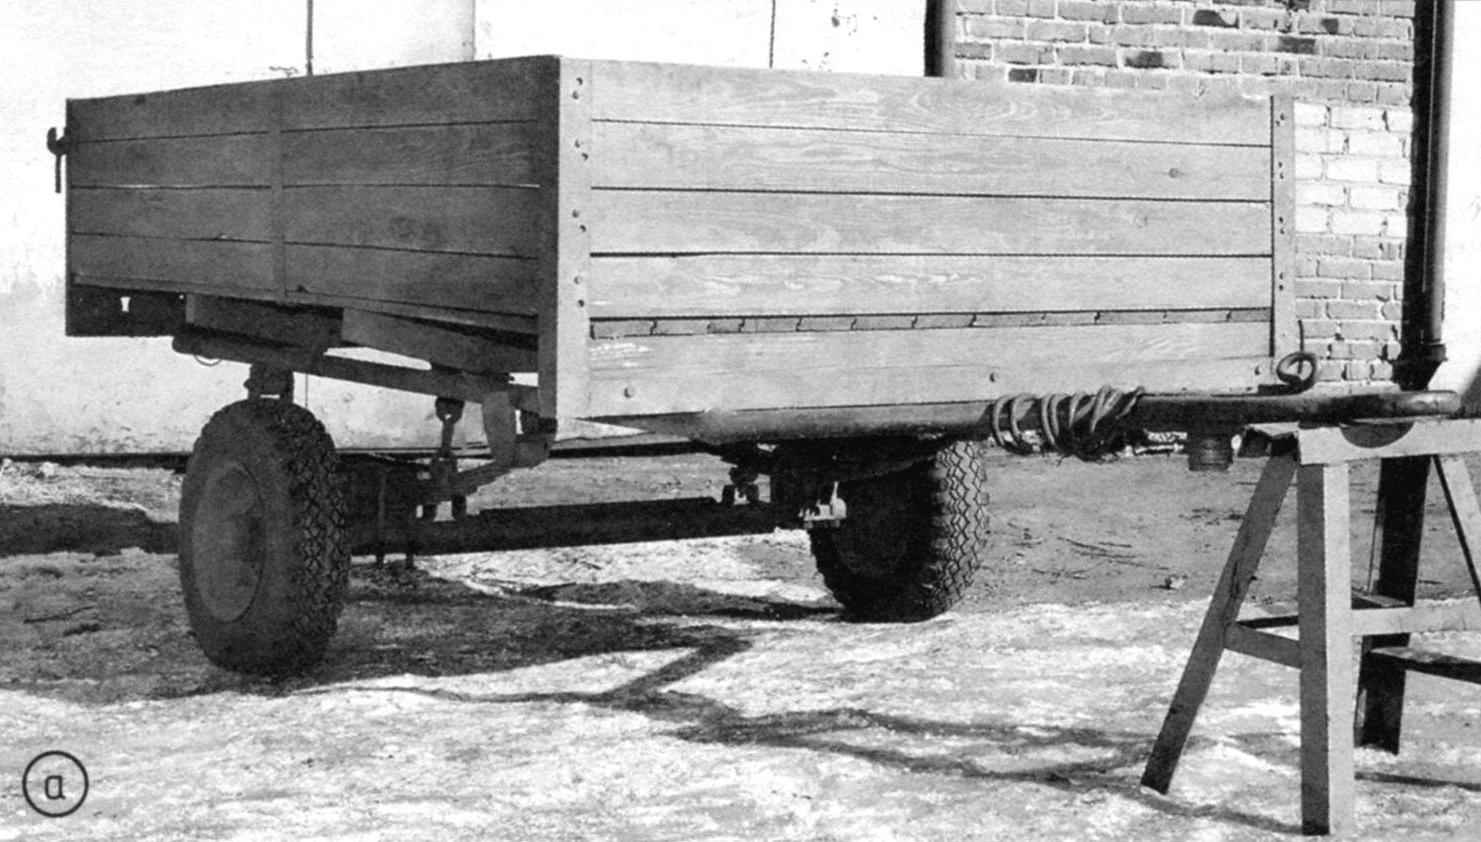 The trailer for the UAZ-469: a-front view ; b - rear view